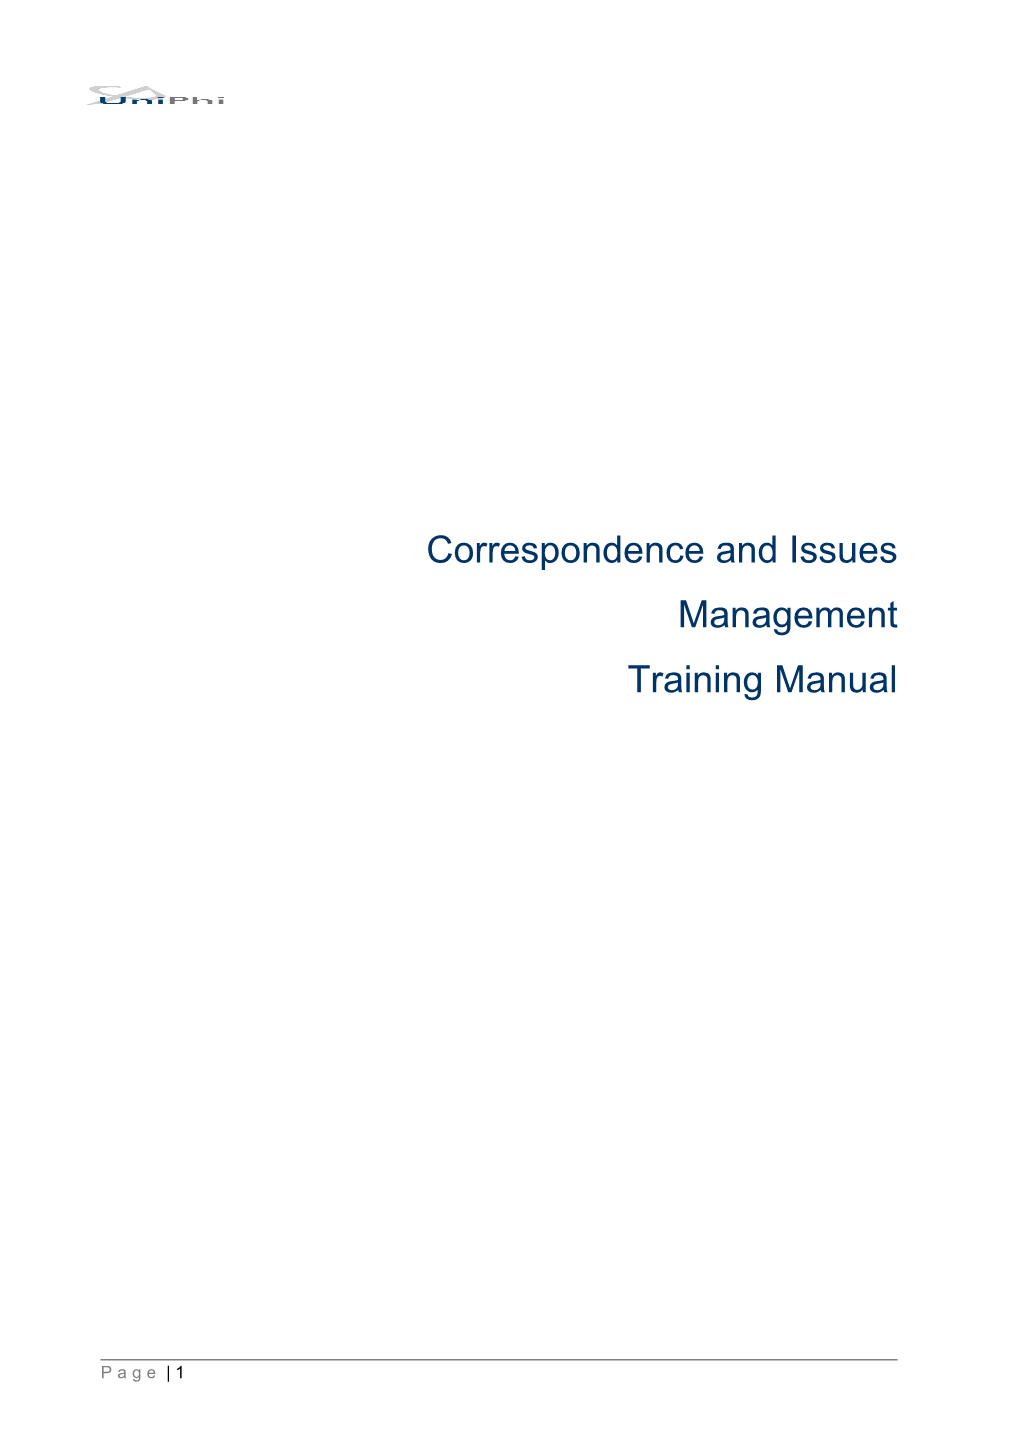 Correspondence and Issues Management